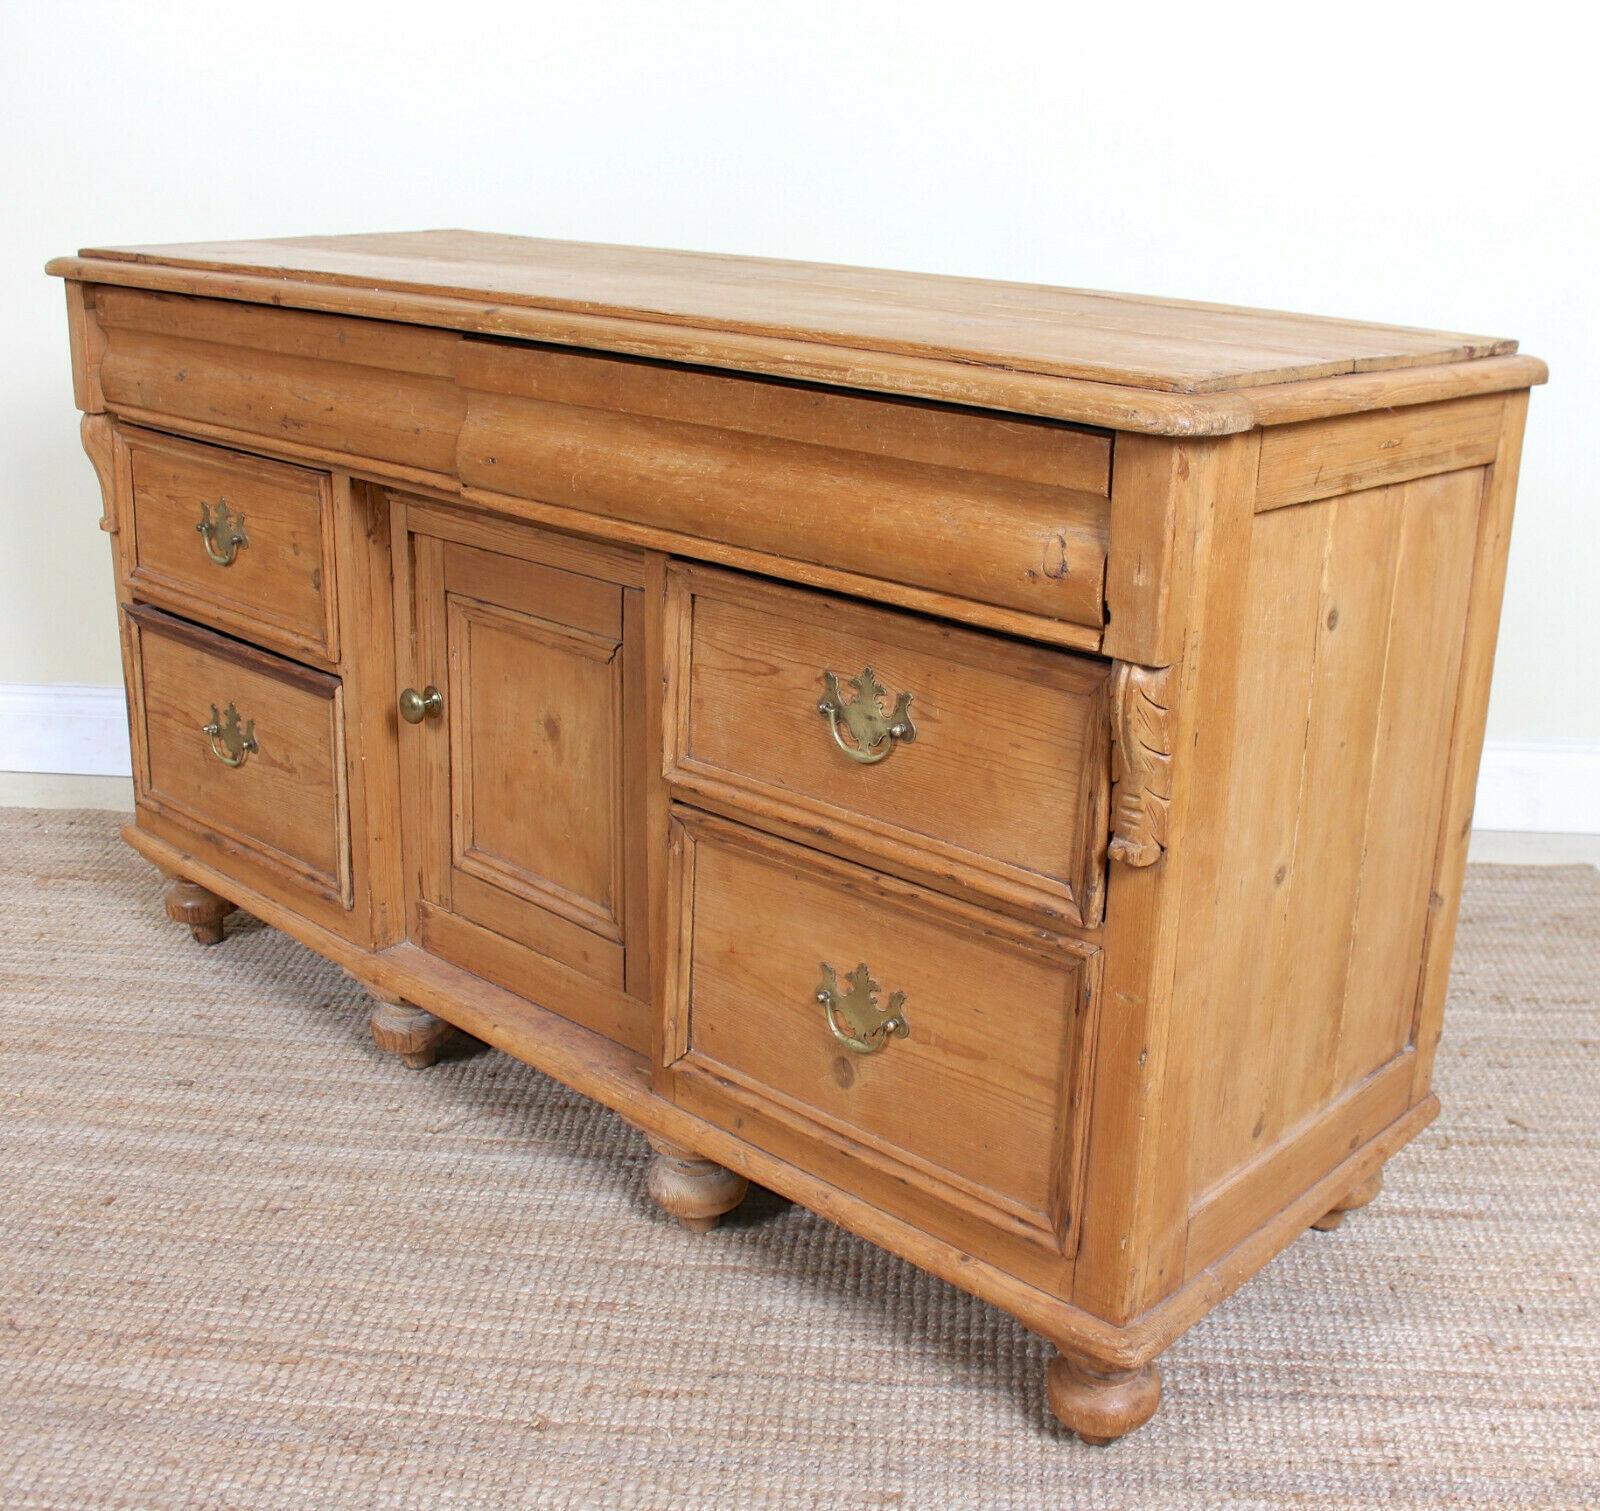 English Pine Sideboard Dresser Base Large Arts & Crafts Country Farm Rustic 2